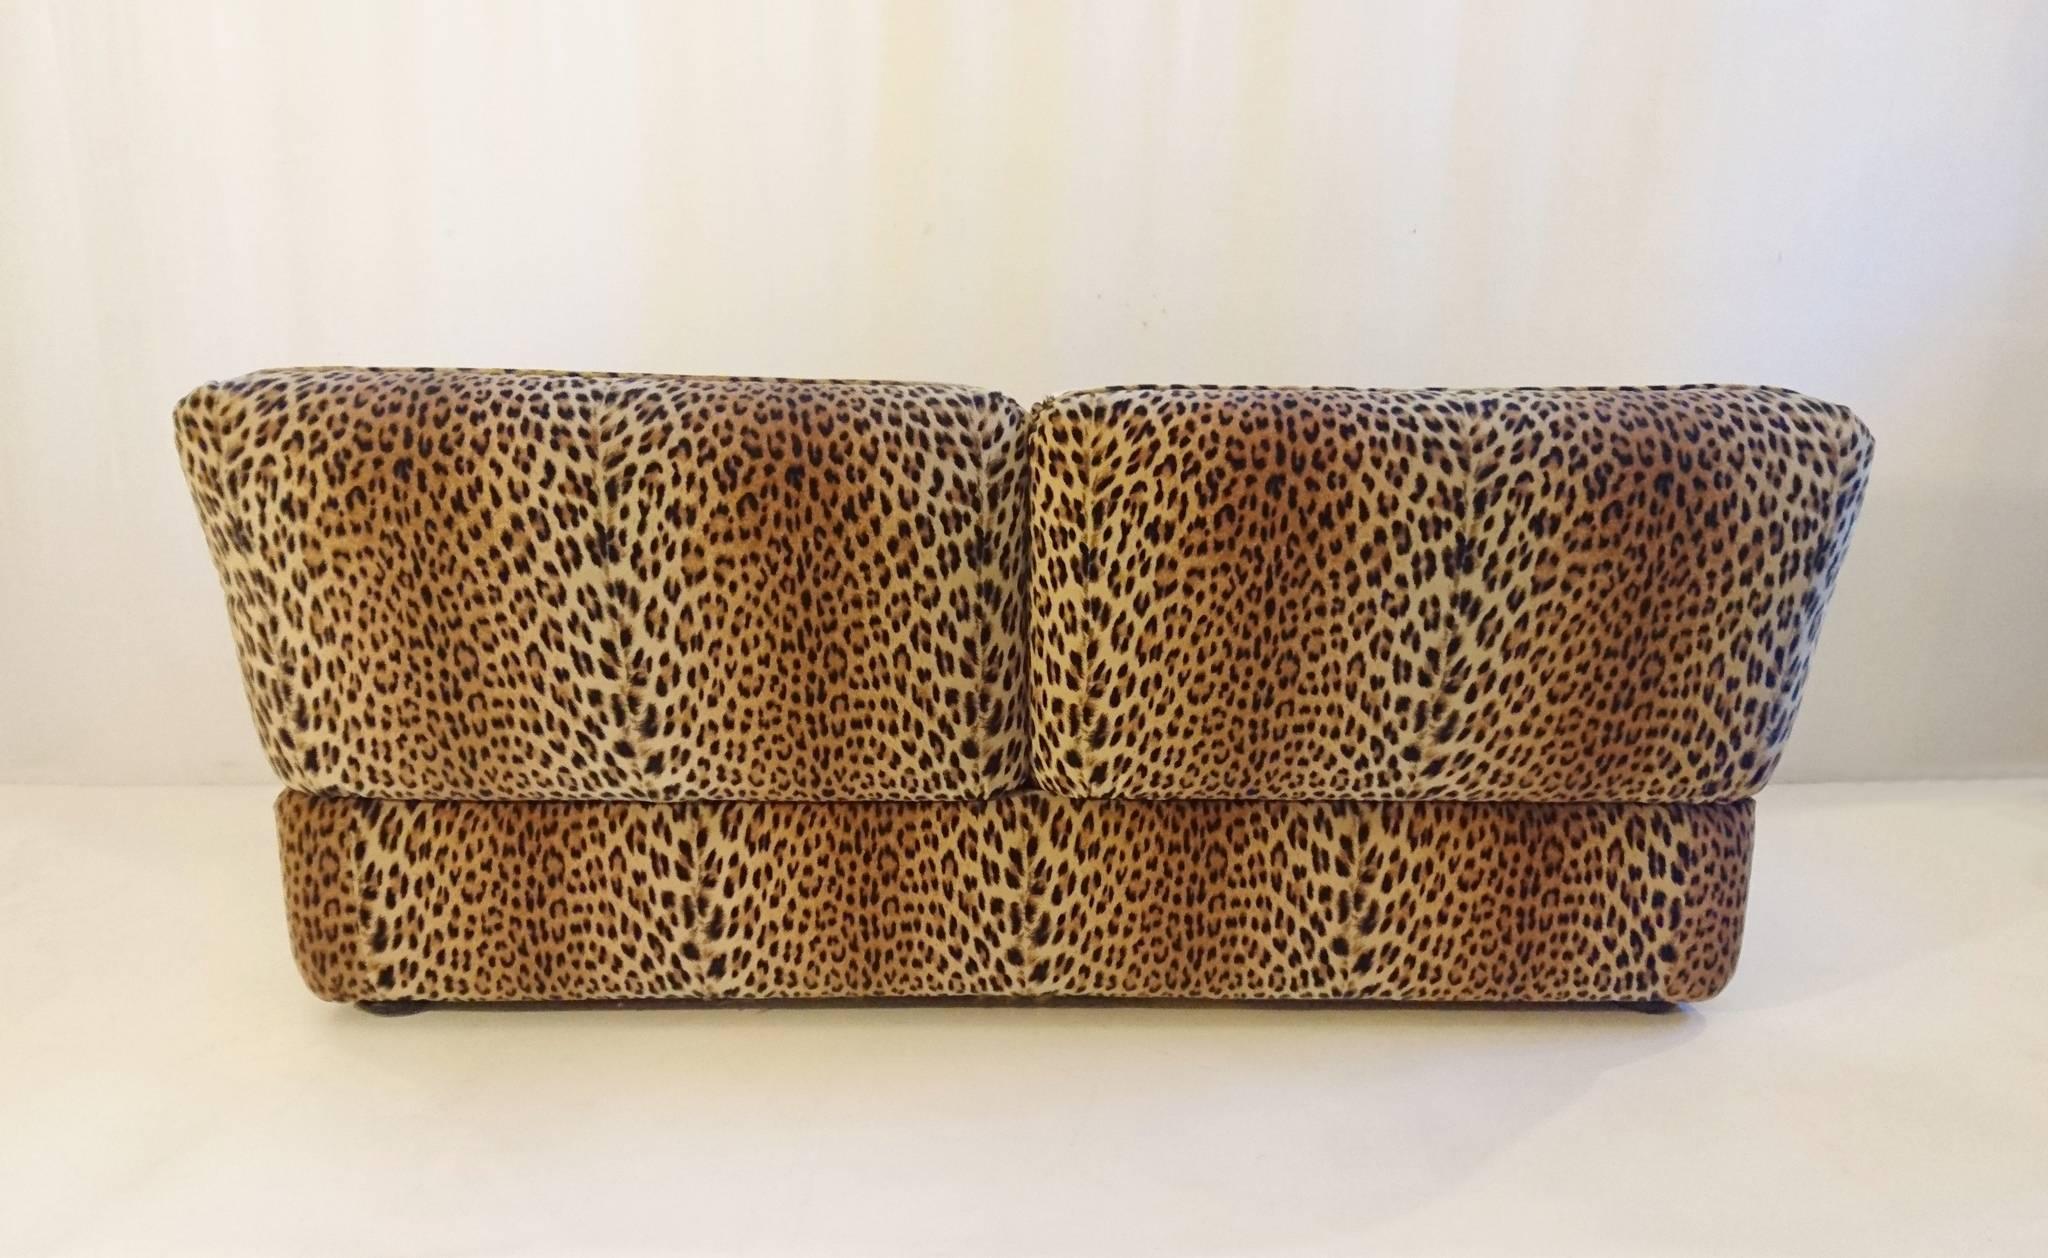 An exceptionally cool vintage sofa by Italian brand Cyrus Company that is still in existence today. The sofa is in excellent condition and very plush and comfortable. Cushions are not flat or deflated. No visible stains wear or tear to the velvet